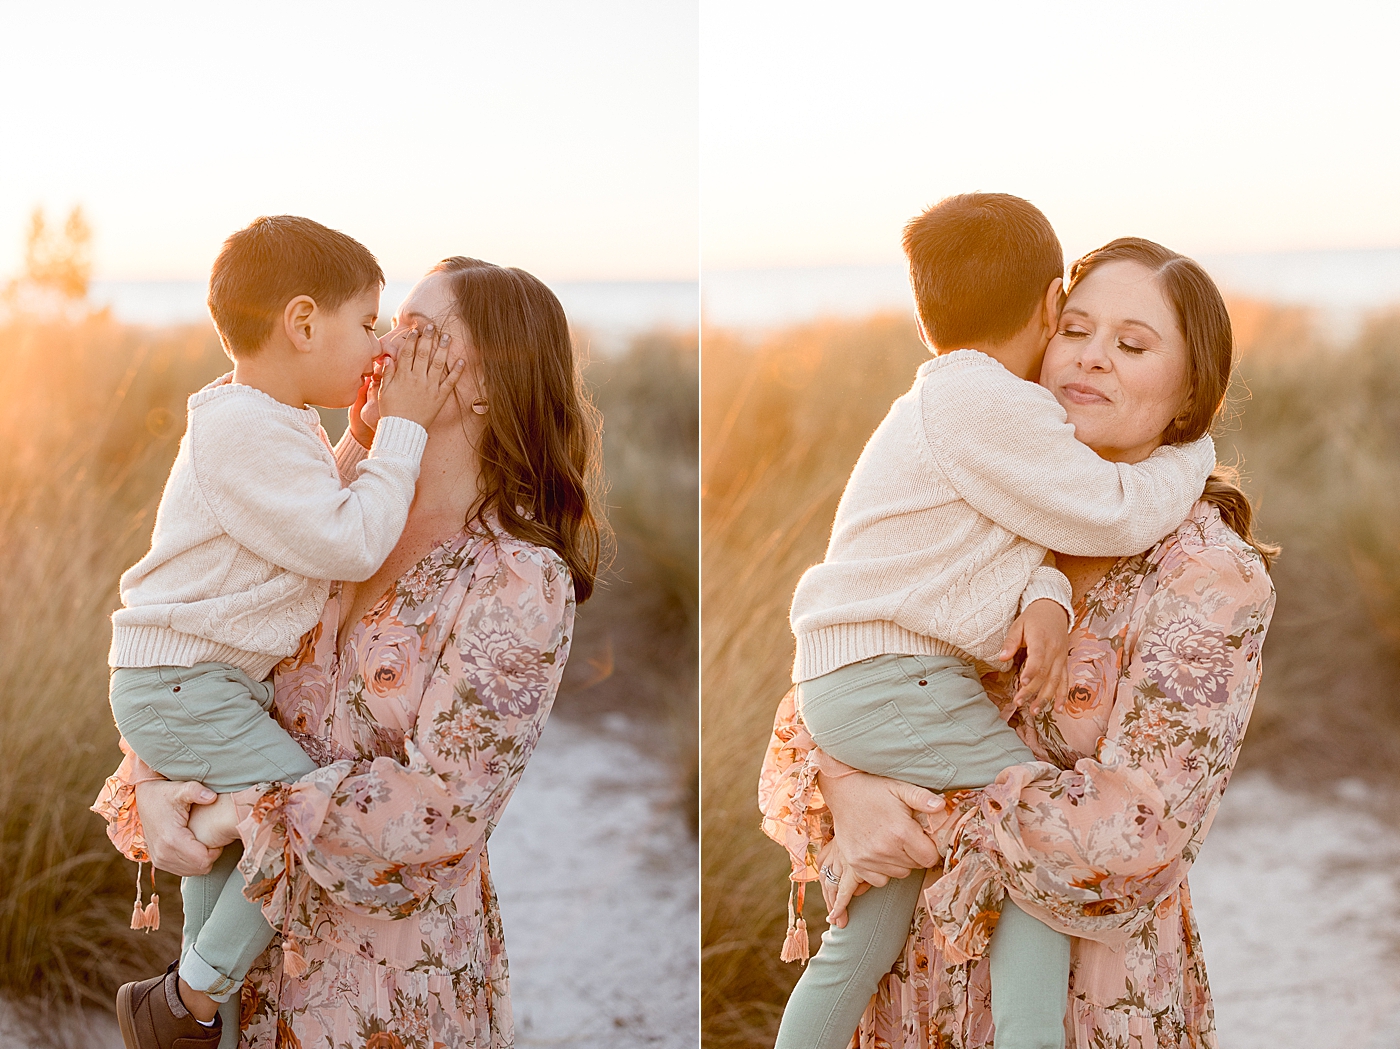 Sweet moments between a mother and son. Moment documented by Tampa Family Photographer, Brittany Elise Photography.